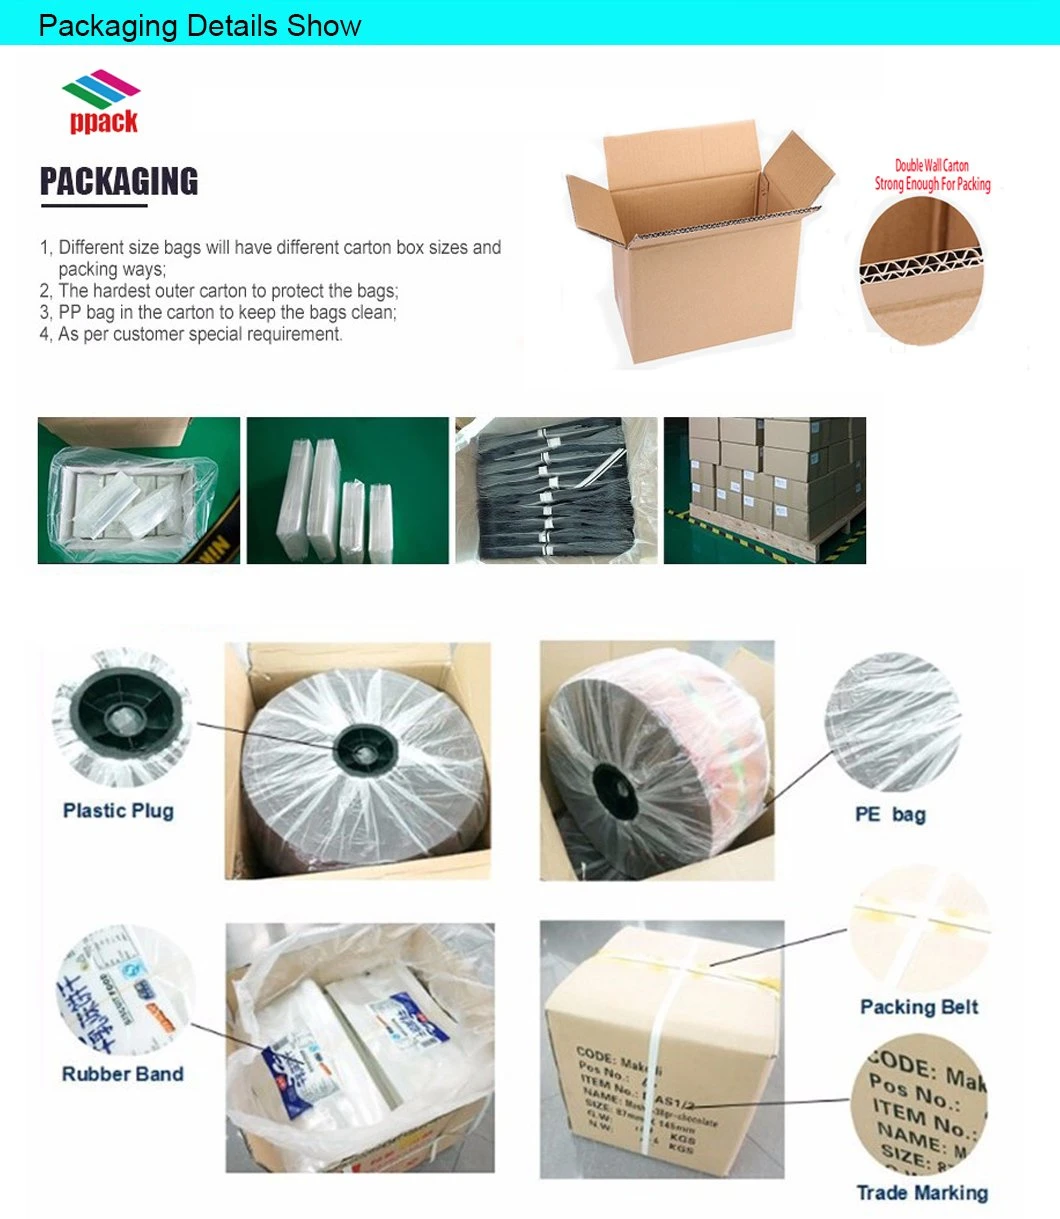 Plastic /Seal /Adhesive Tape/Small/Hanger OPP Poly Bag Customized OPP Packing Seal Plastic Self Adhesive Clear Transparent Bag Made in China Manufacture